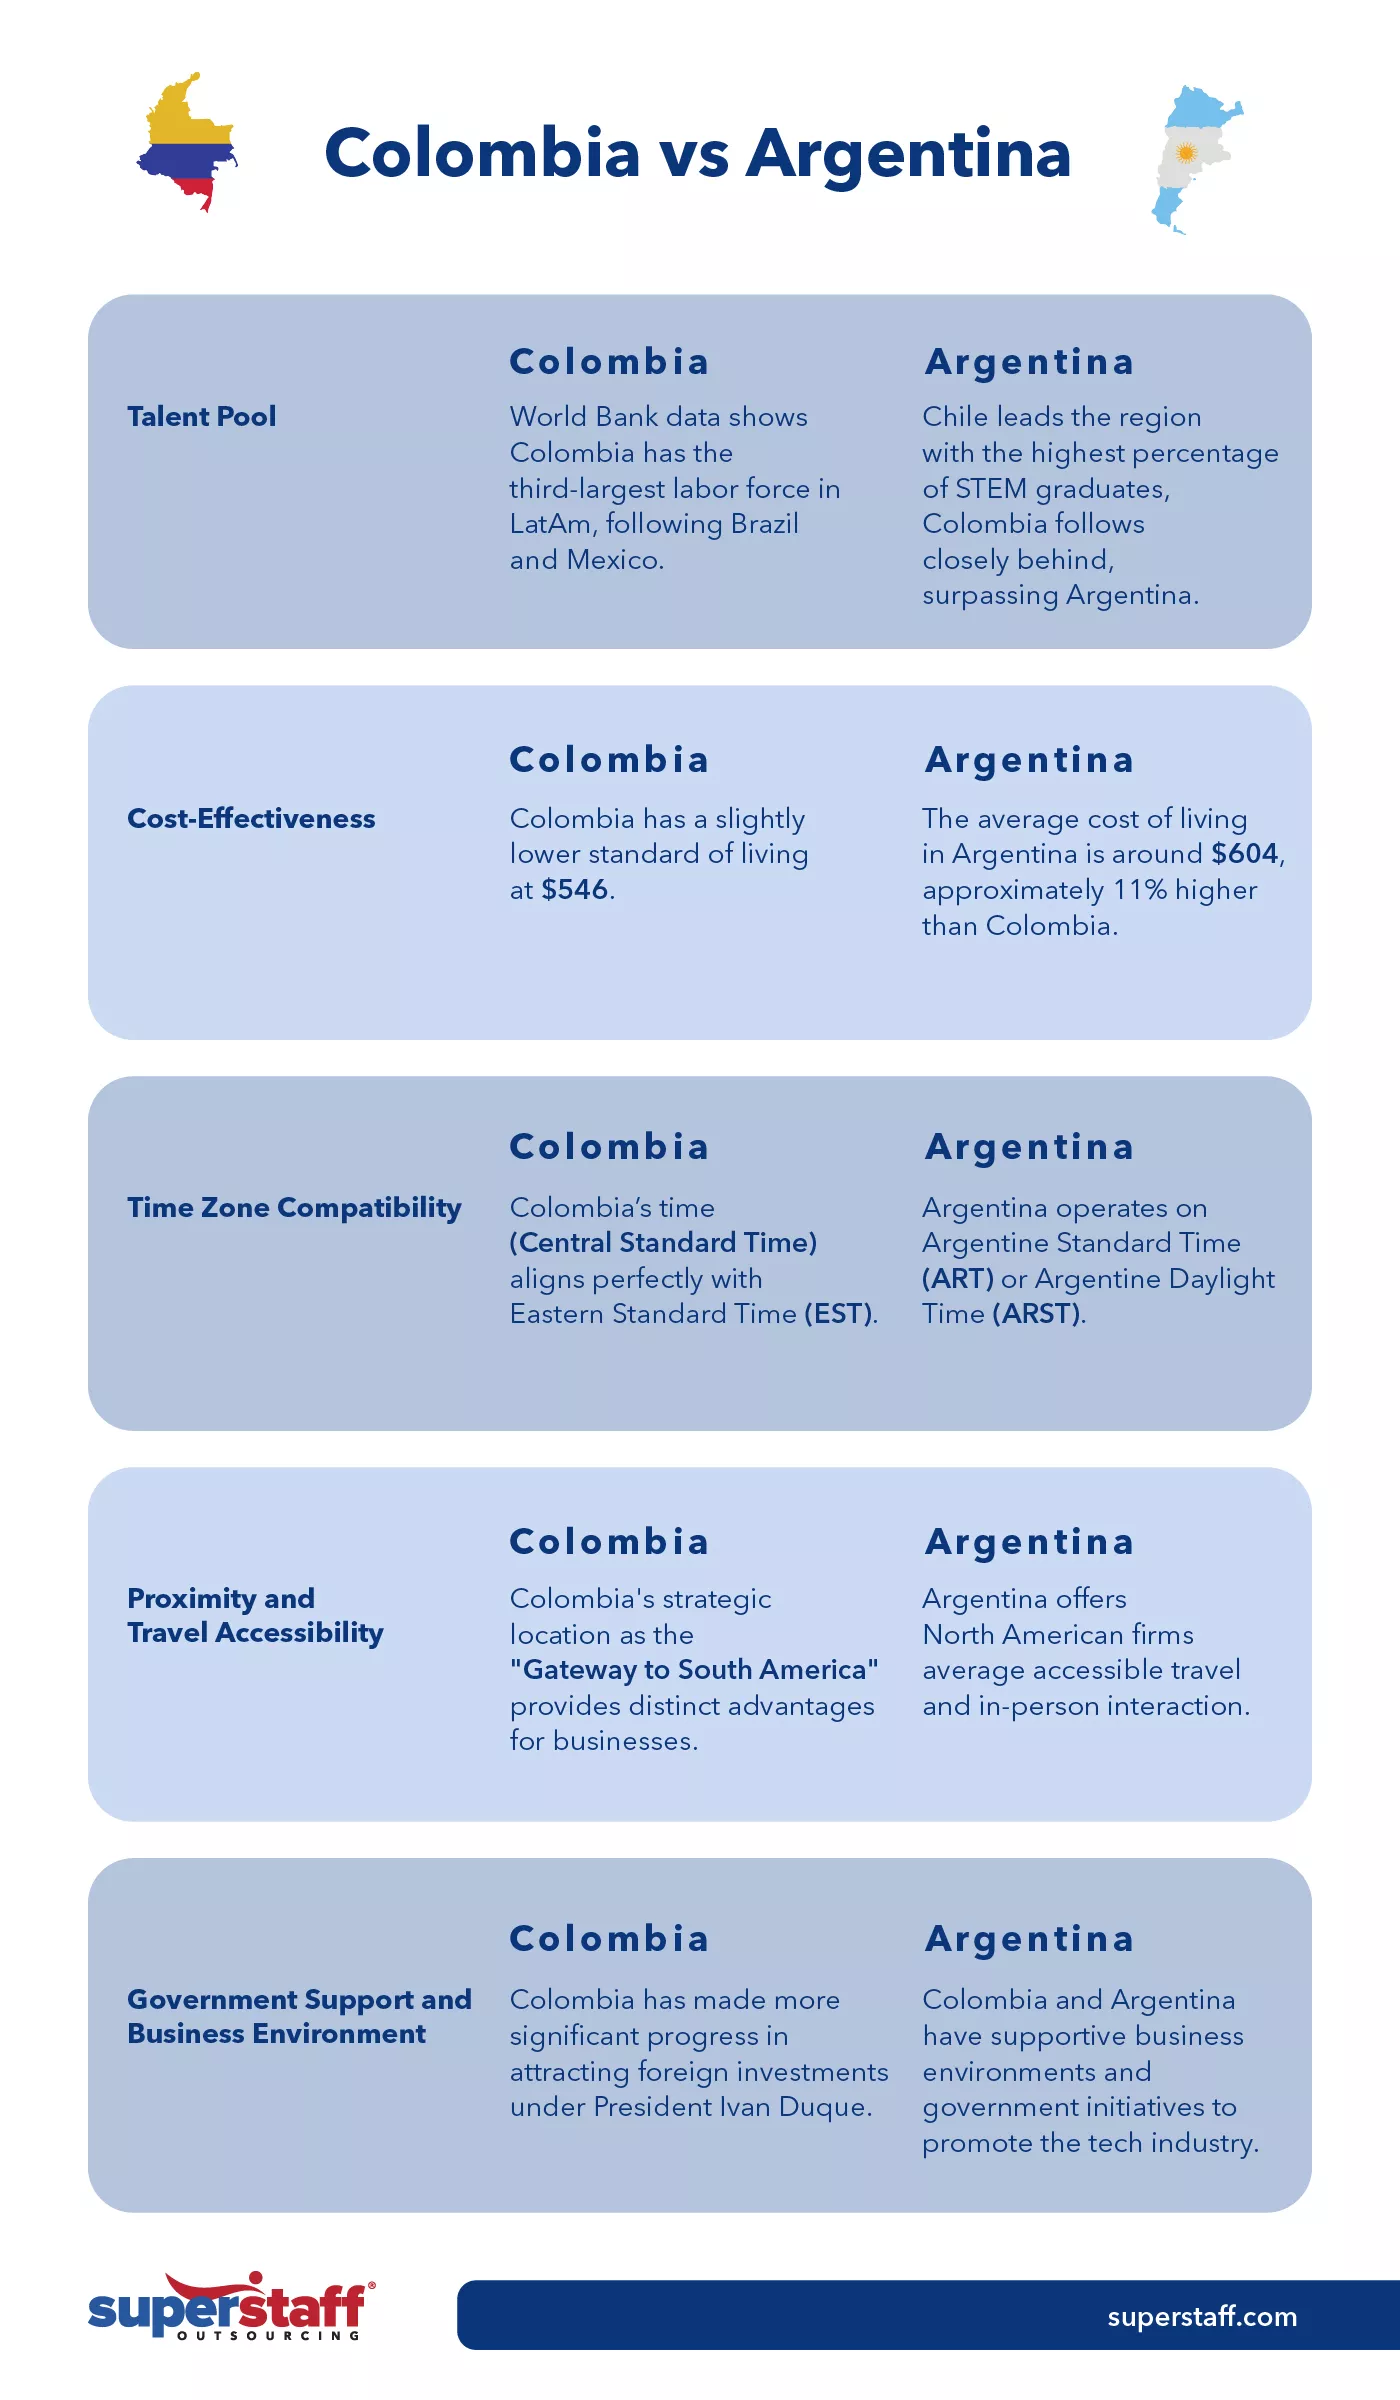 Colombia vs. Argentina for nearshoring tech solutions.